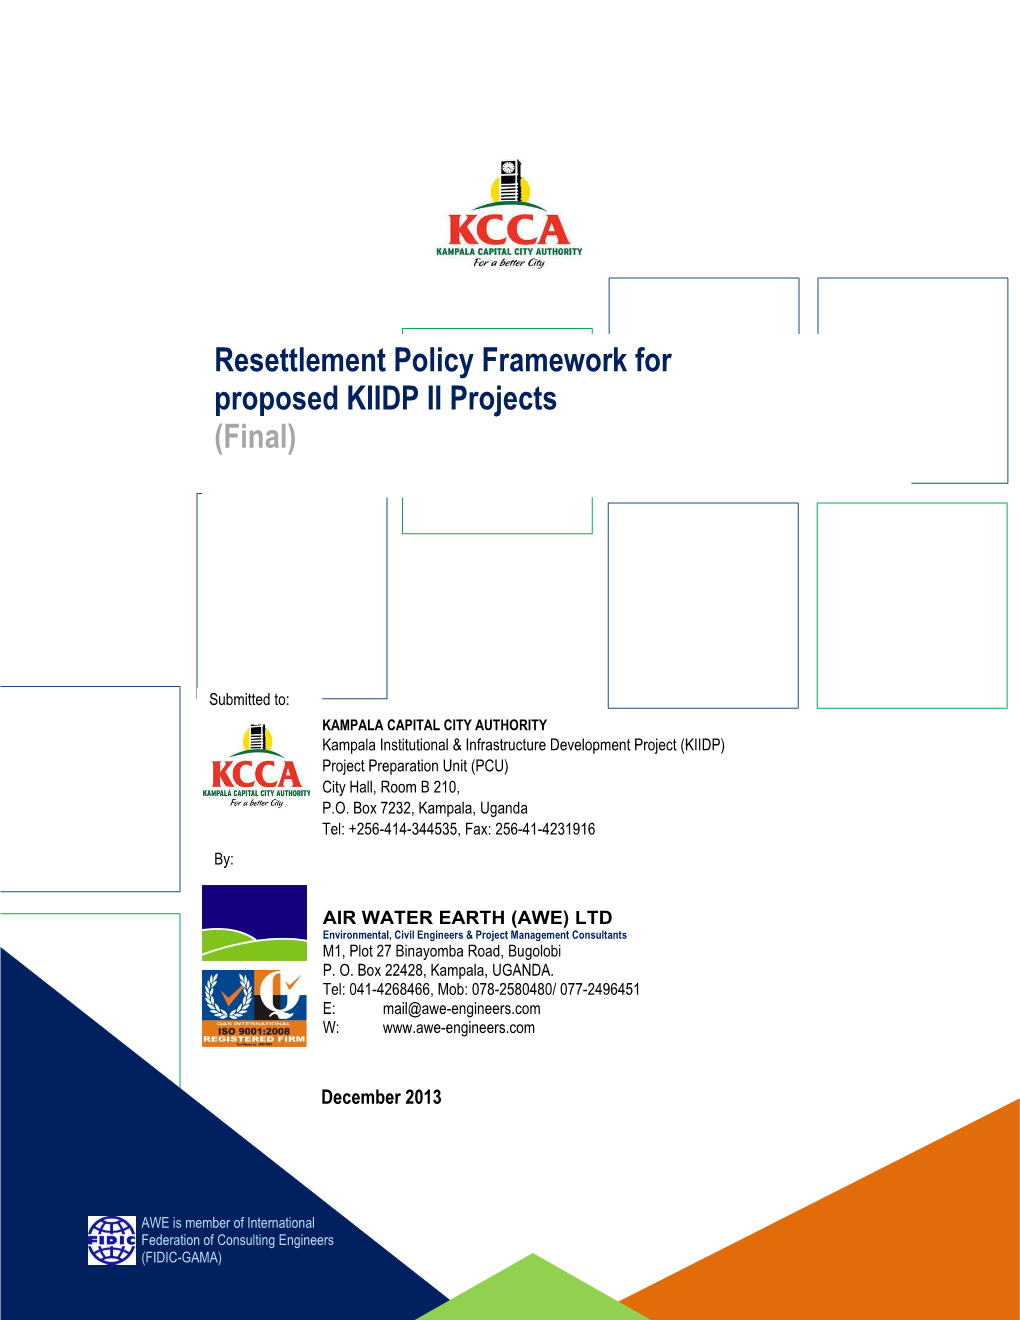 Resettlement Policy Framework for Proposed KIIDP II Projects (Final)